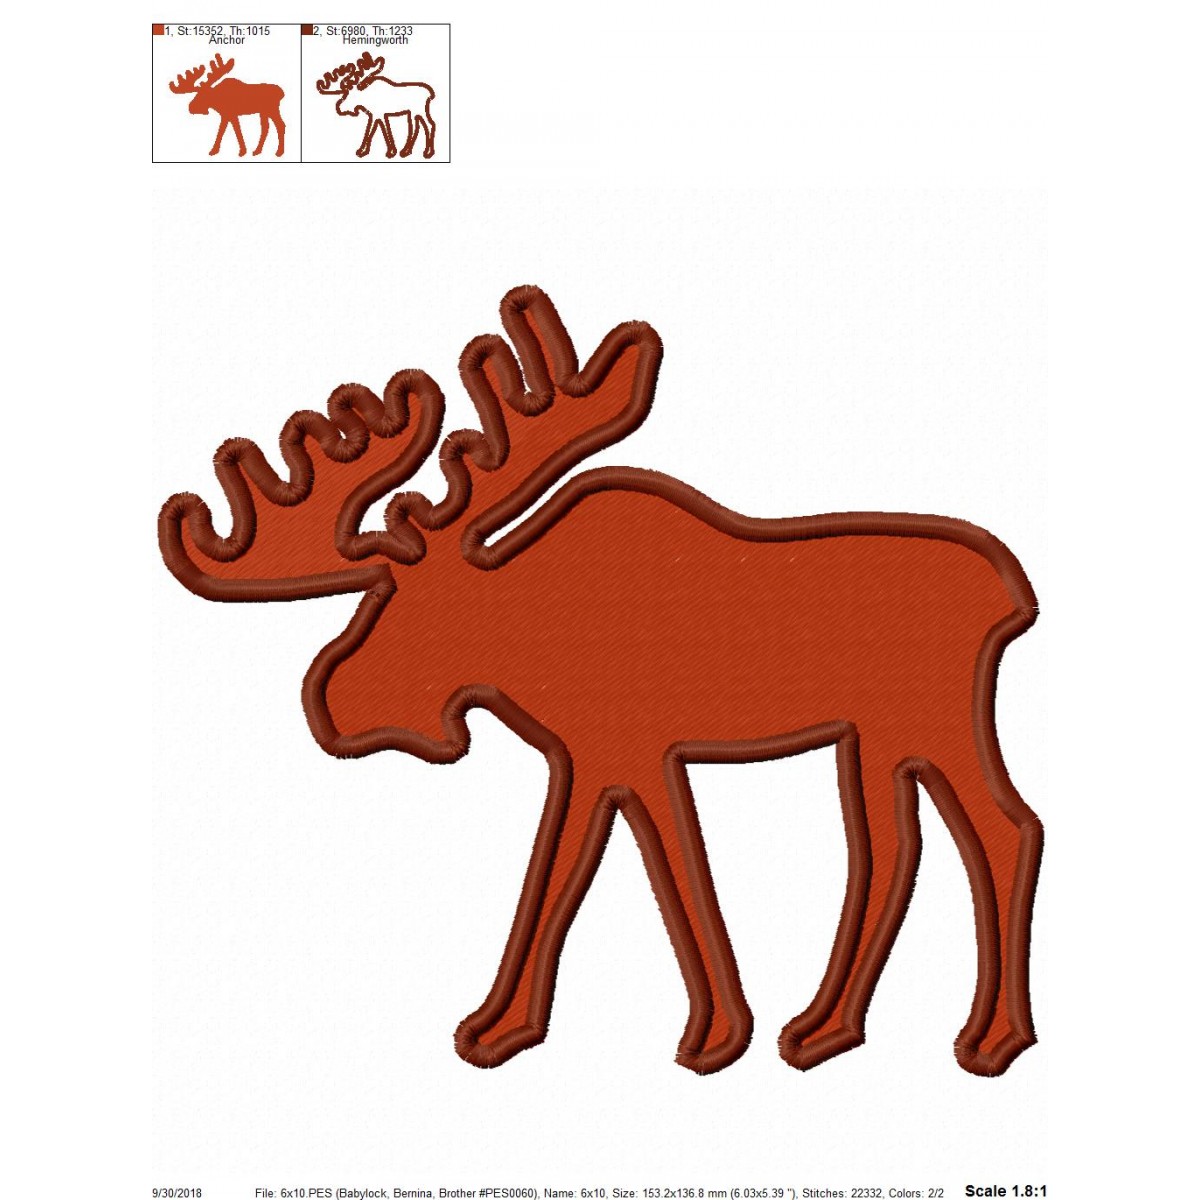 Deer Head Silhouette with Antlers - Comes in Fill Stitch and Applique